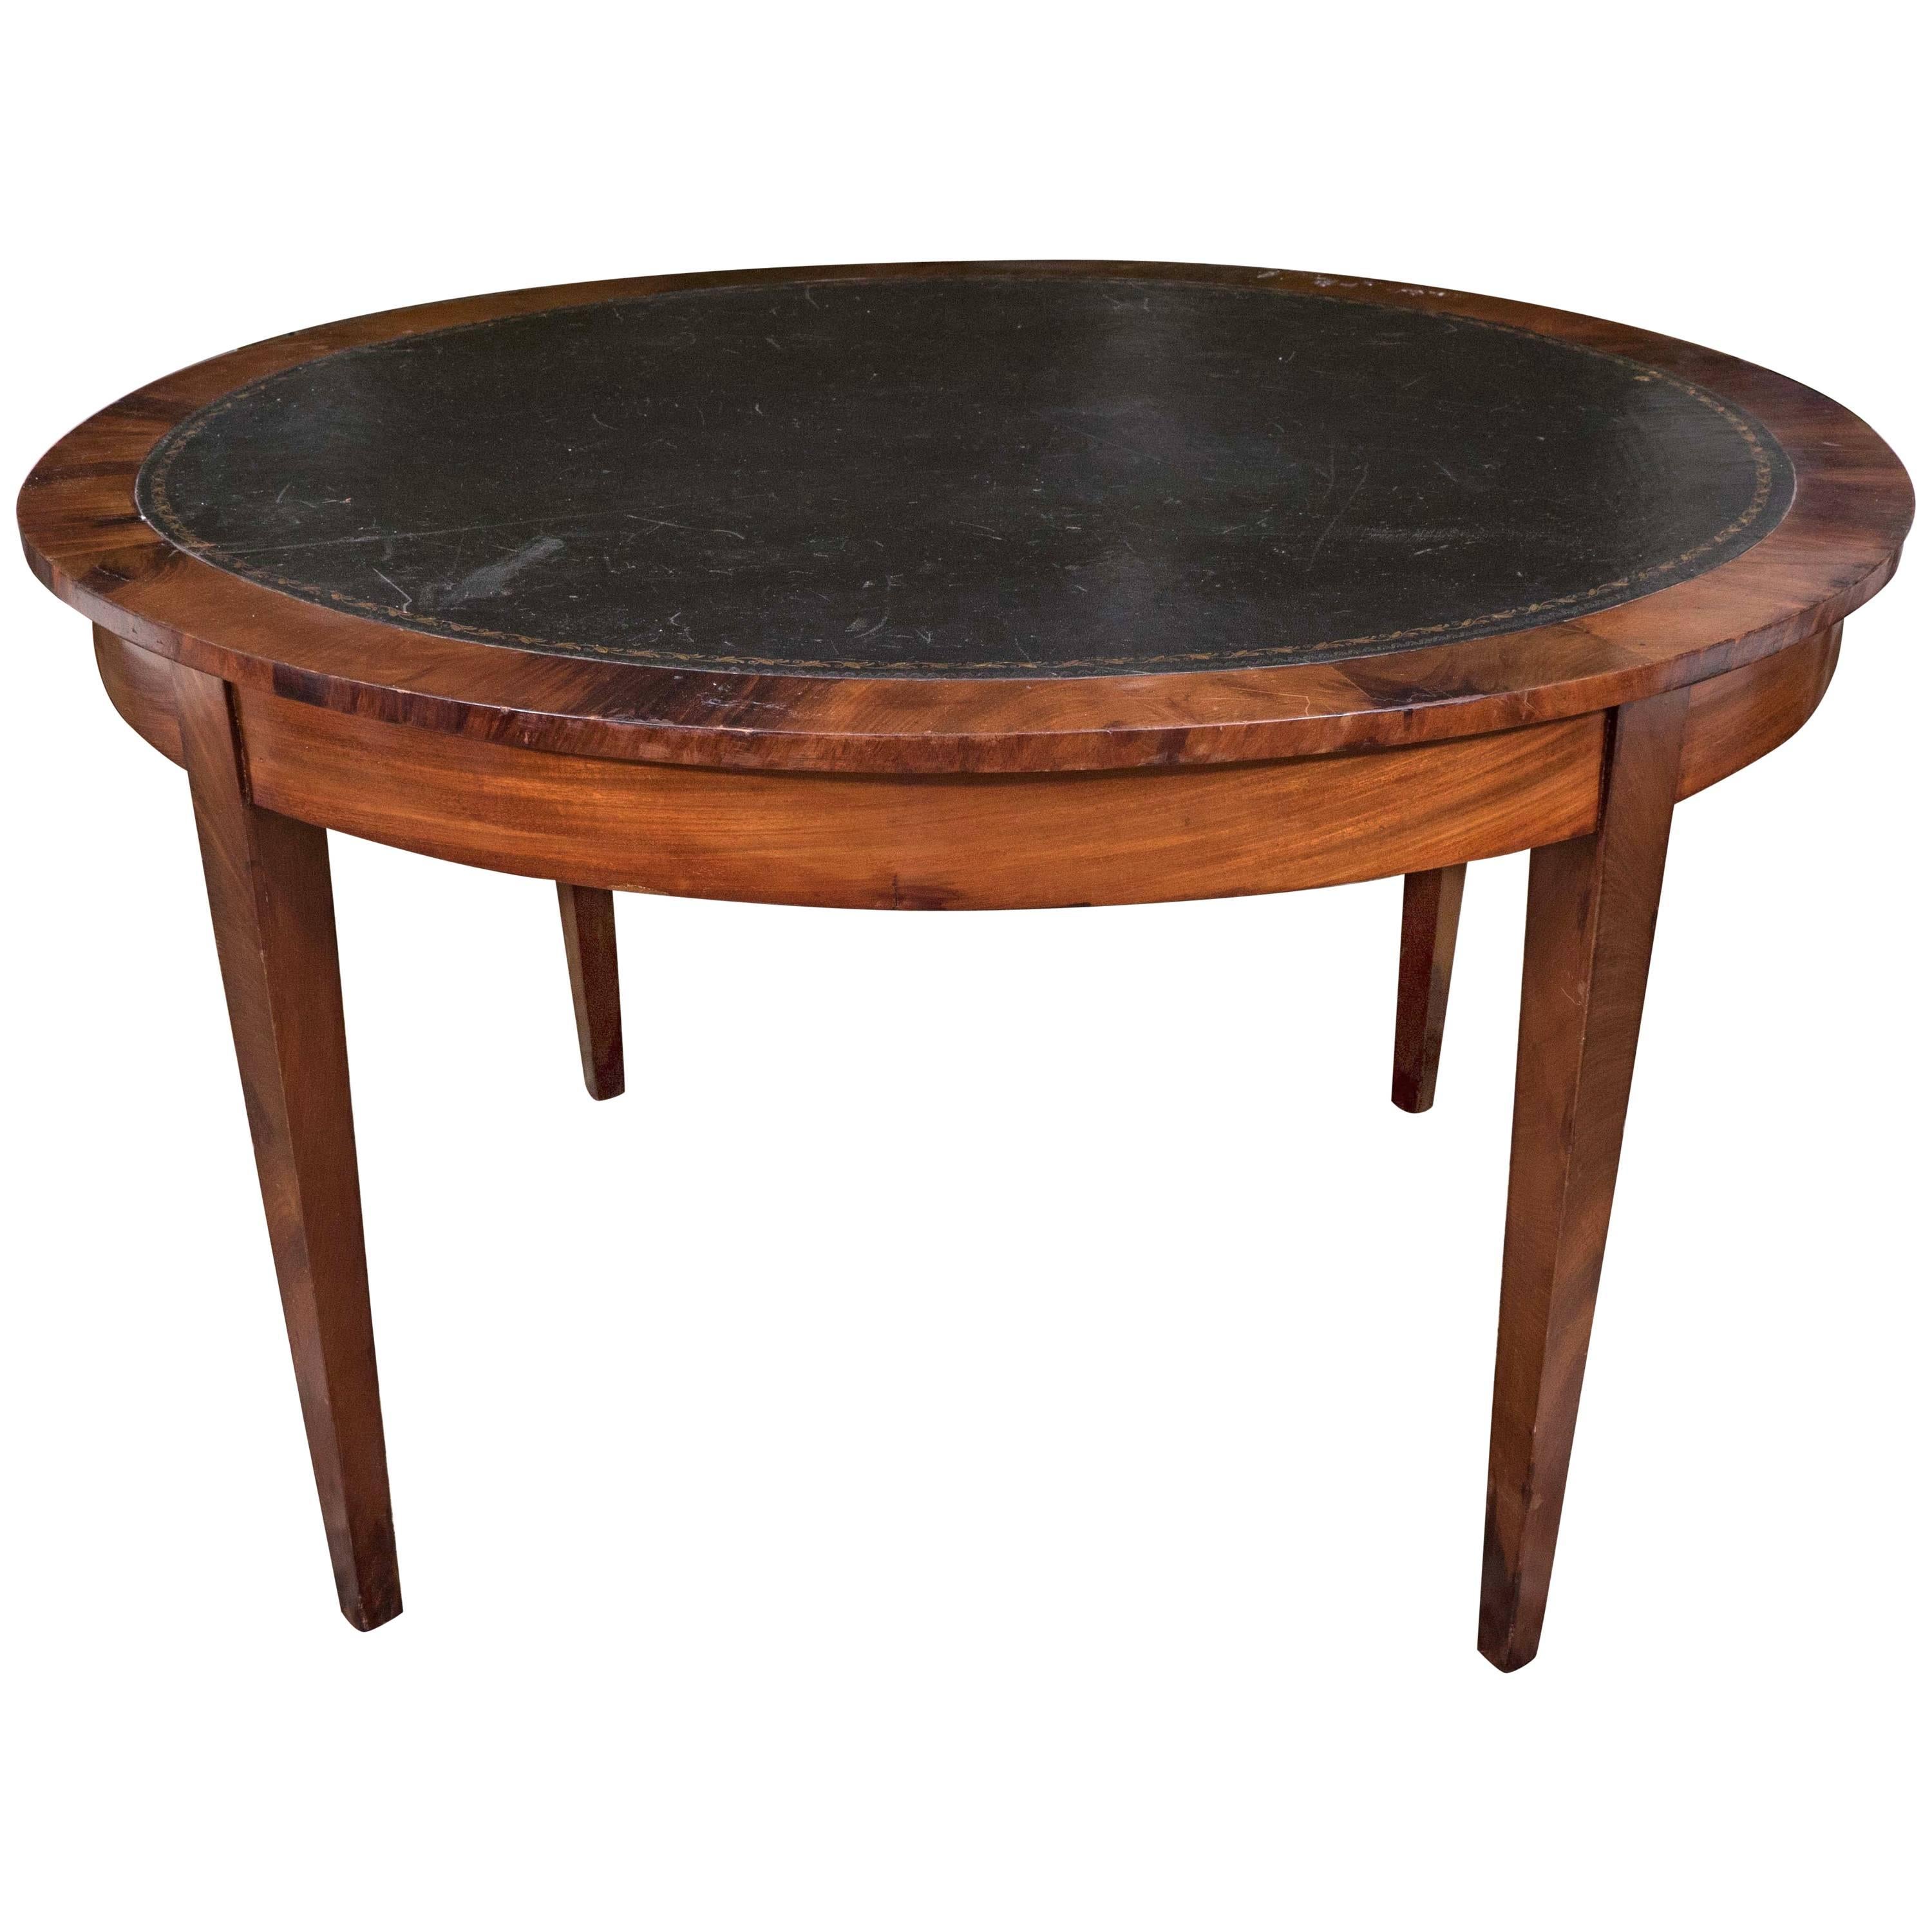 A 19th-Century Mahogany Table with Black Leather Top